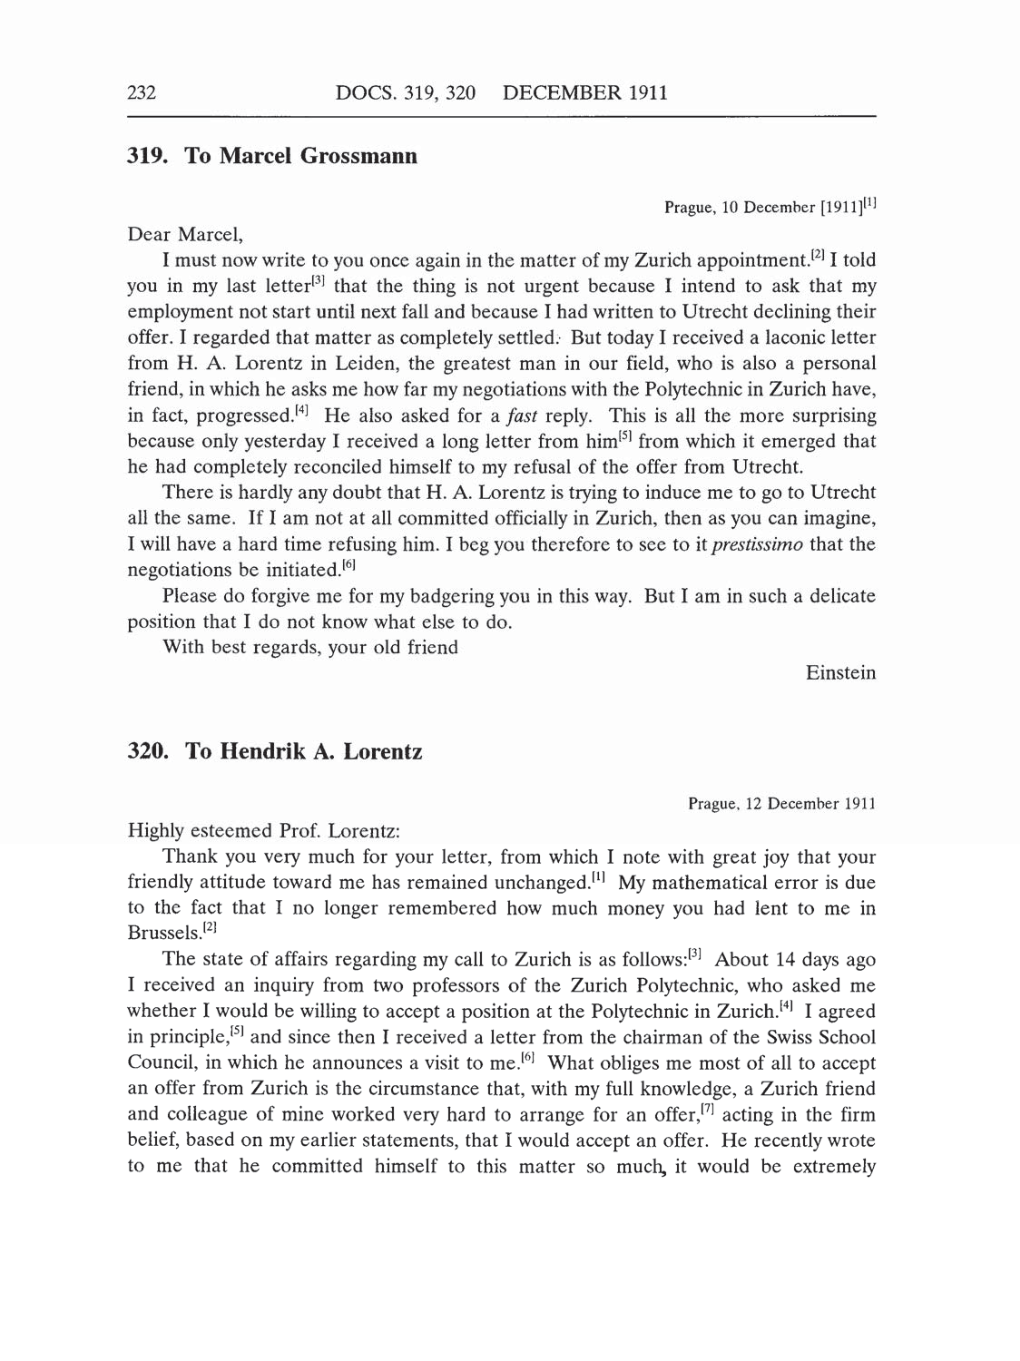 Volume 5: The Swiss Years: Correspondence, 1902-1914 (English translation supplement) page 232